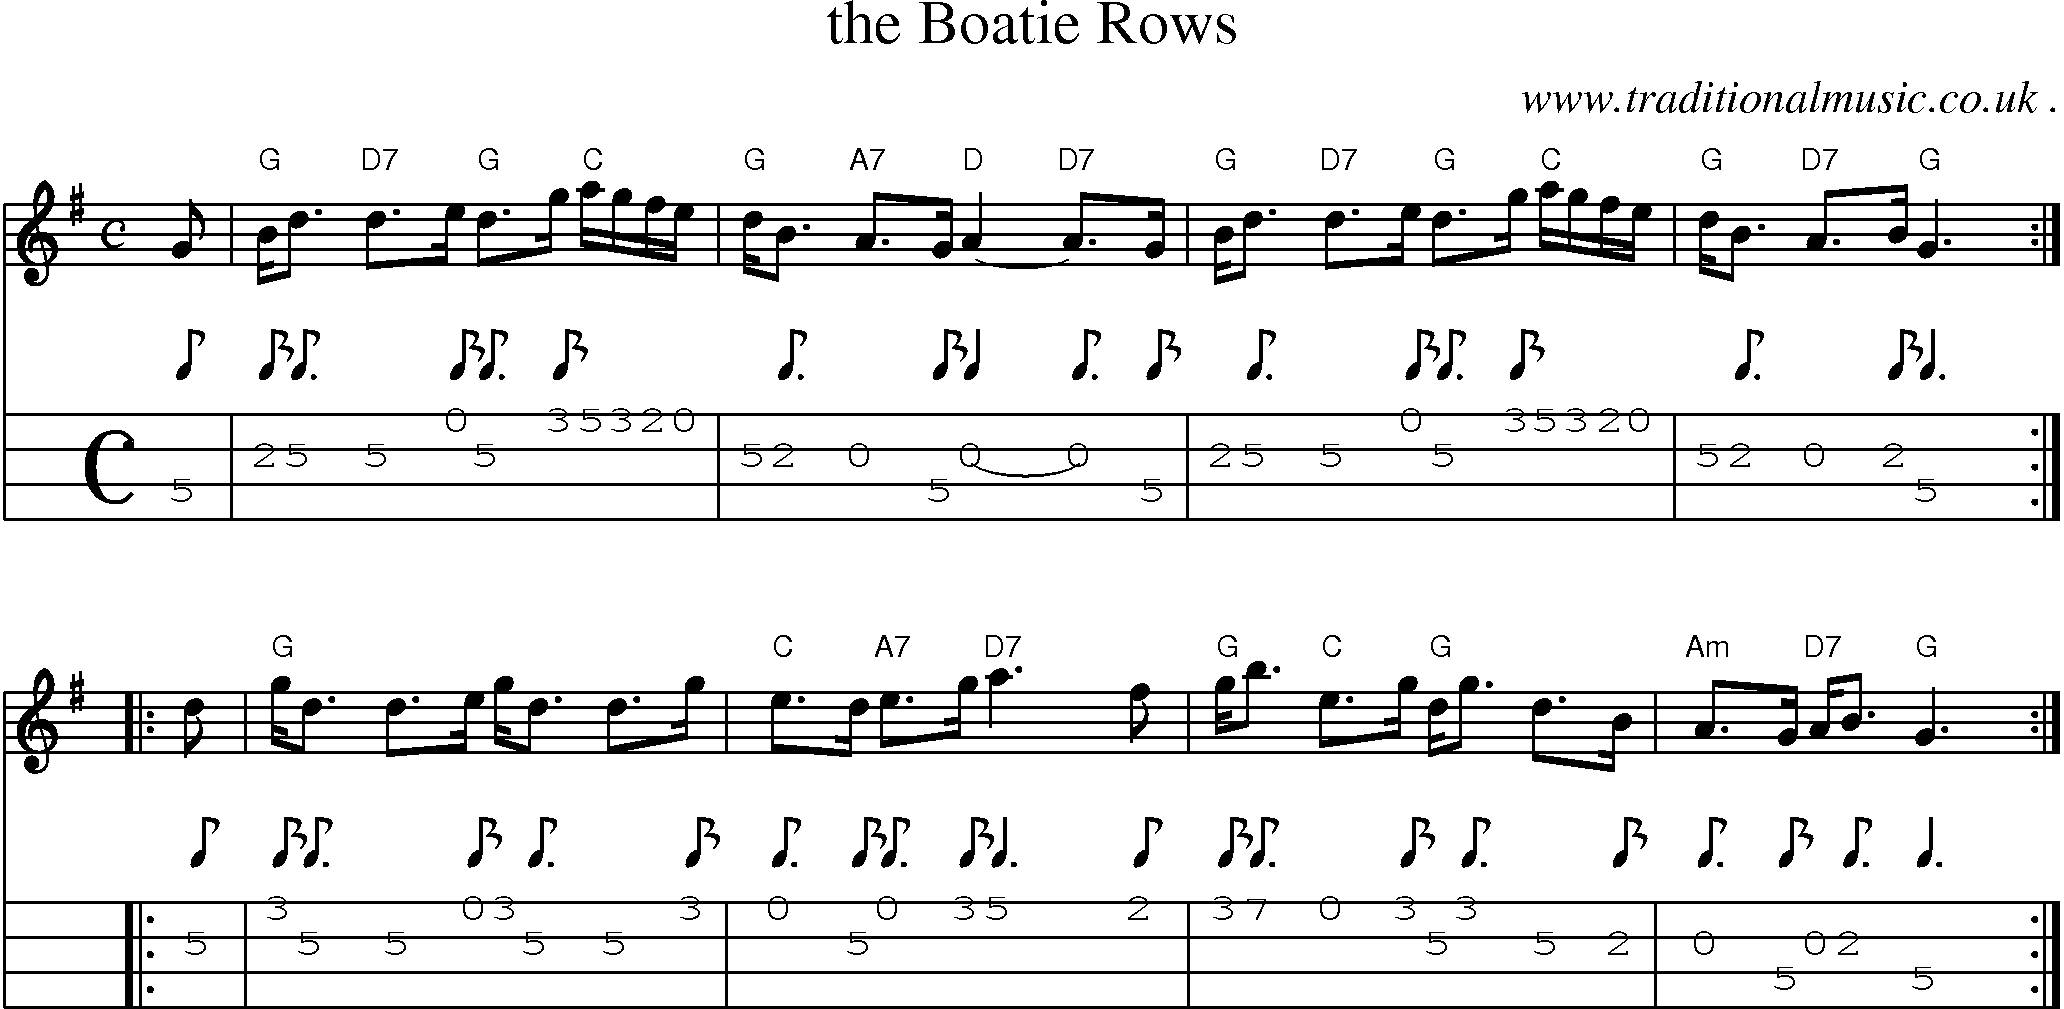 Sheet-music  score, Chords and Mandolin Tabs for The Boatie Rows